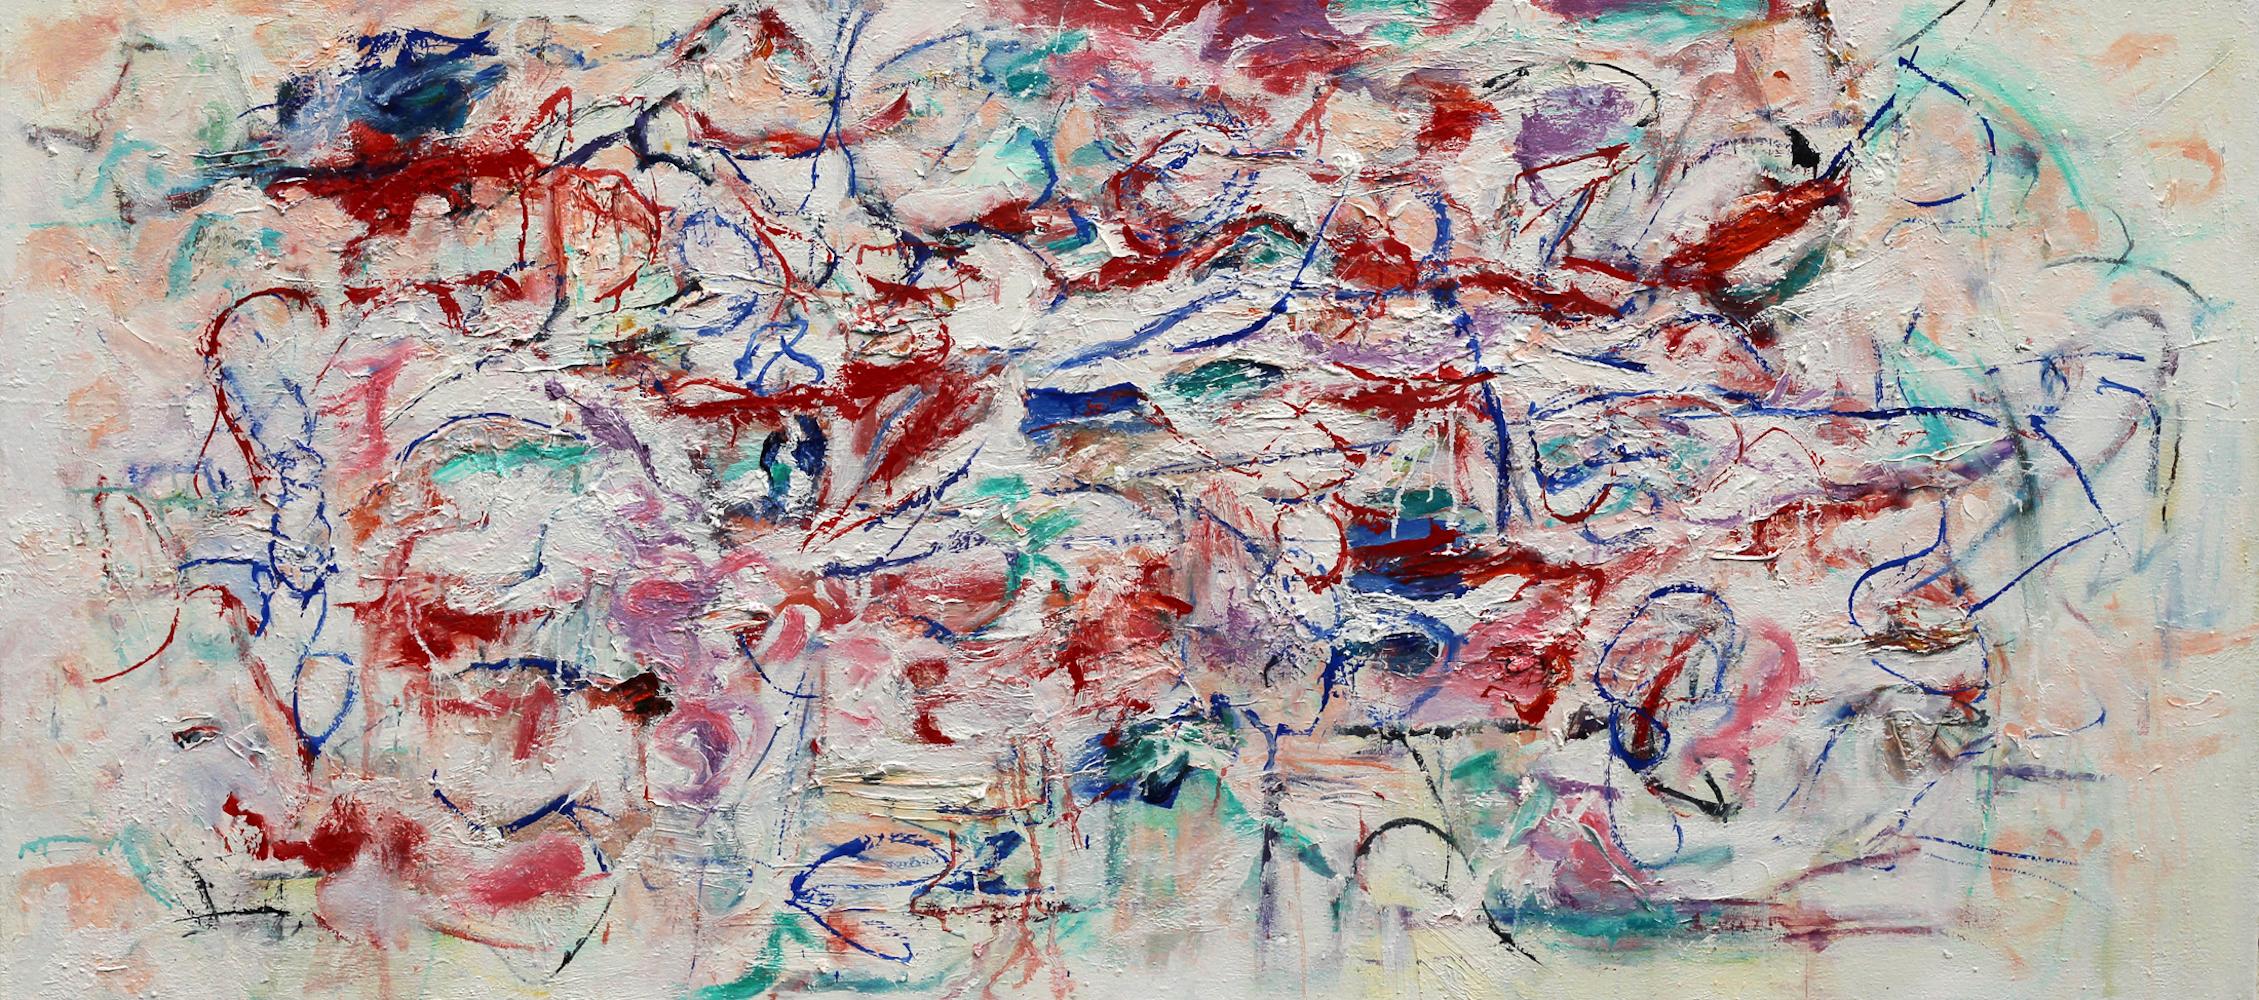 Katherine Borkowski-Byrne’s “Bumpy Road” is a colorful abstract 28 x 62 x 1.5 inch oil painting on canvas with very thick spontaneous brushwork in saturated reds and blues on a white background. This emotionally raw and expressionist painting